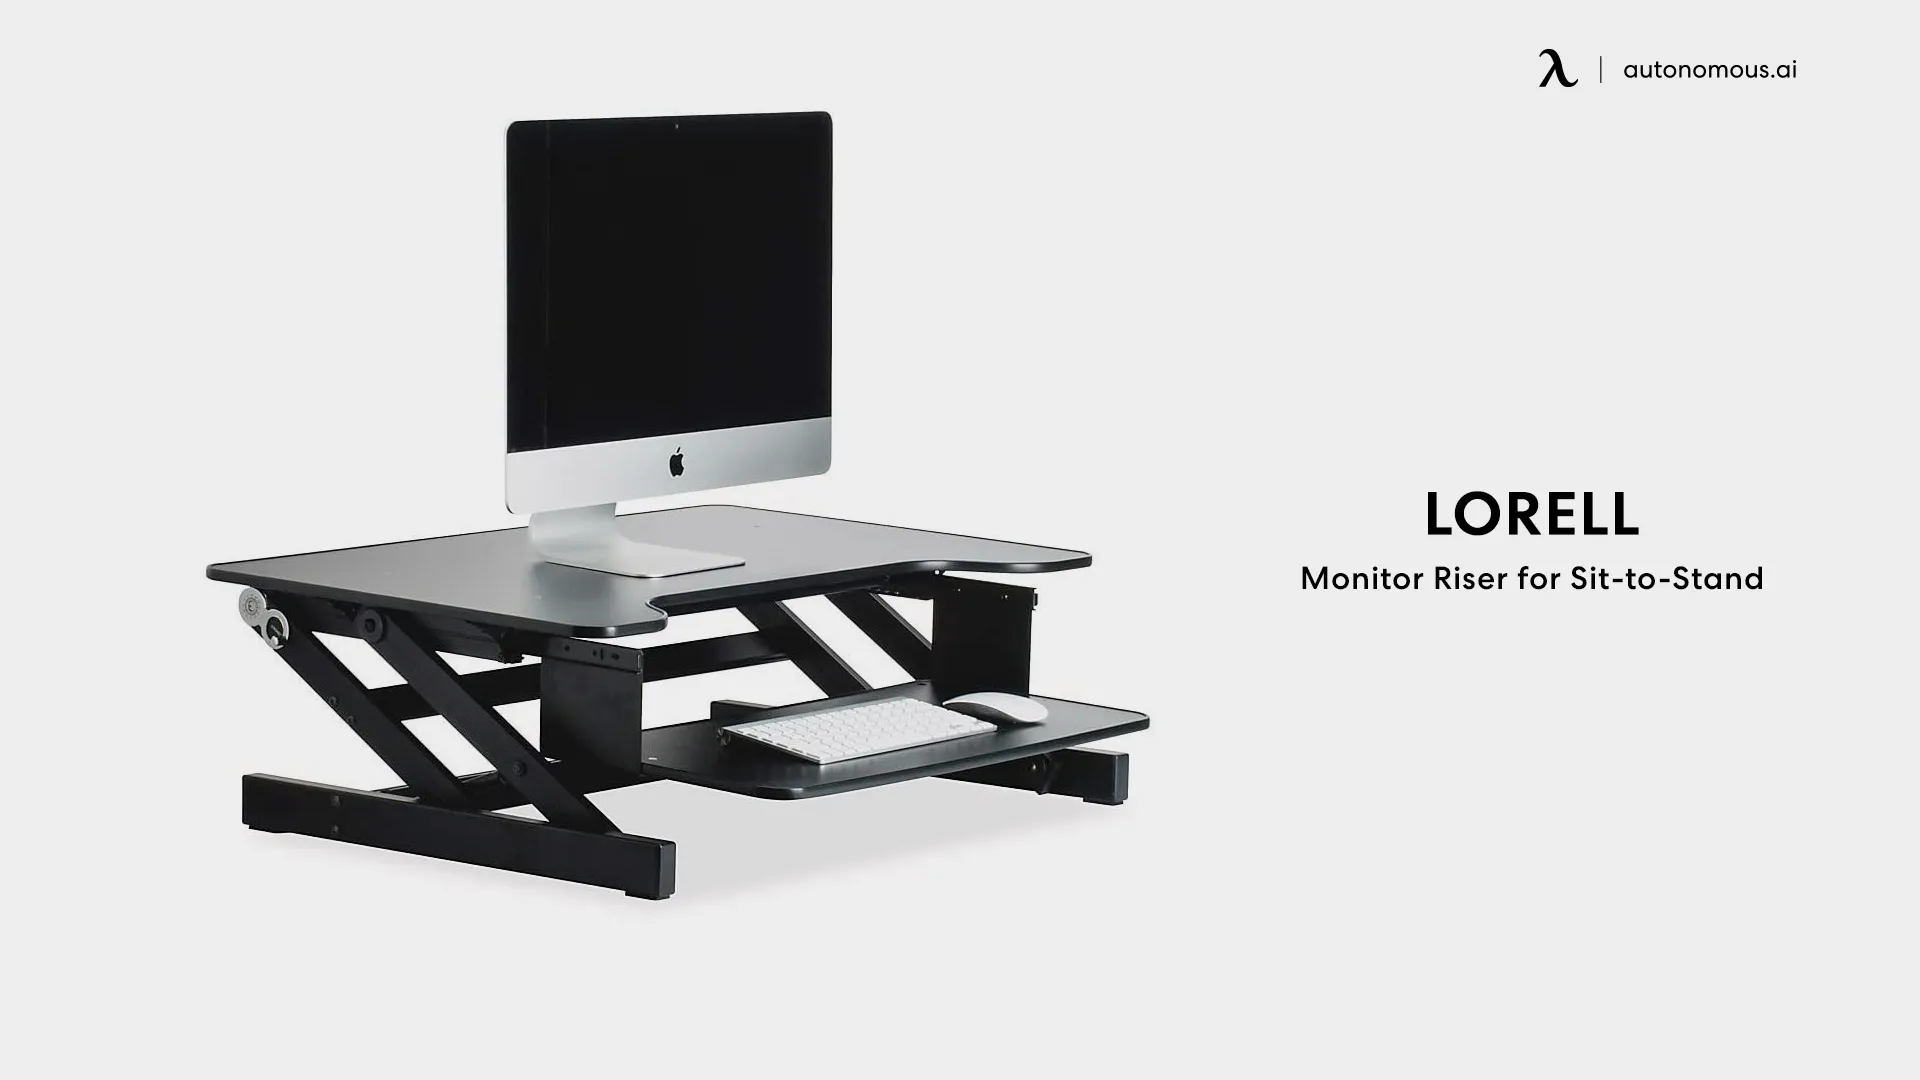 Lorell Monitor Riser for Sit-to-Stand